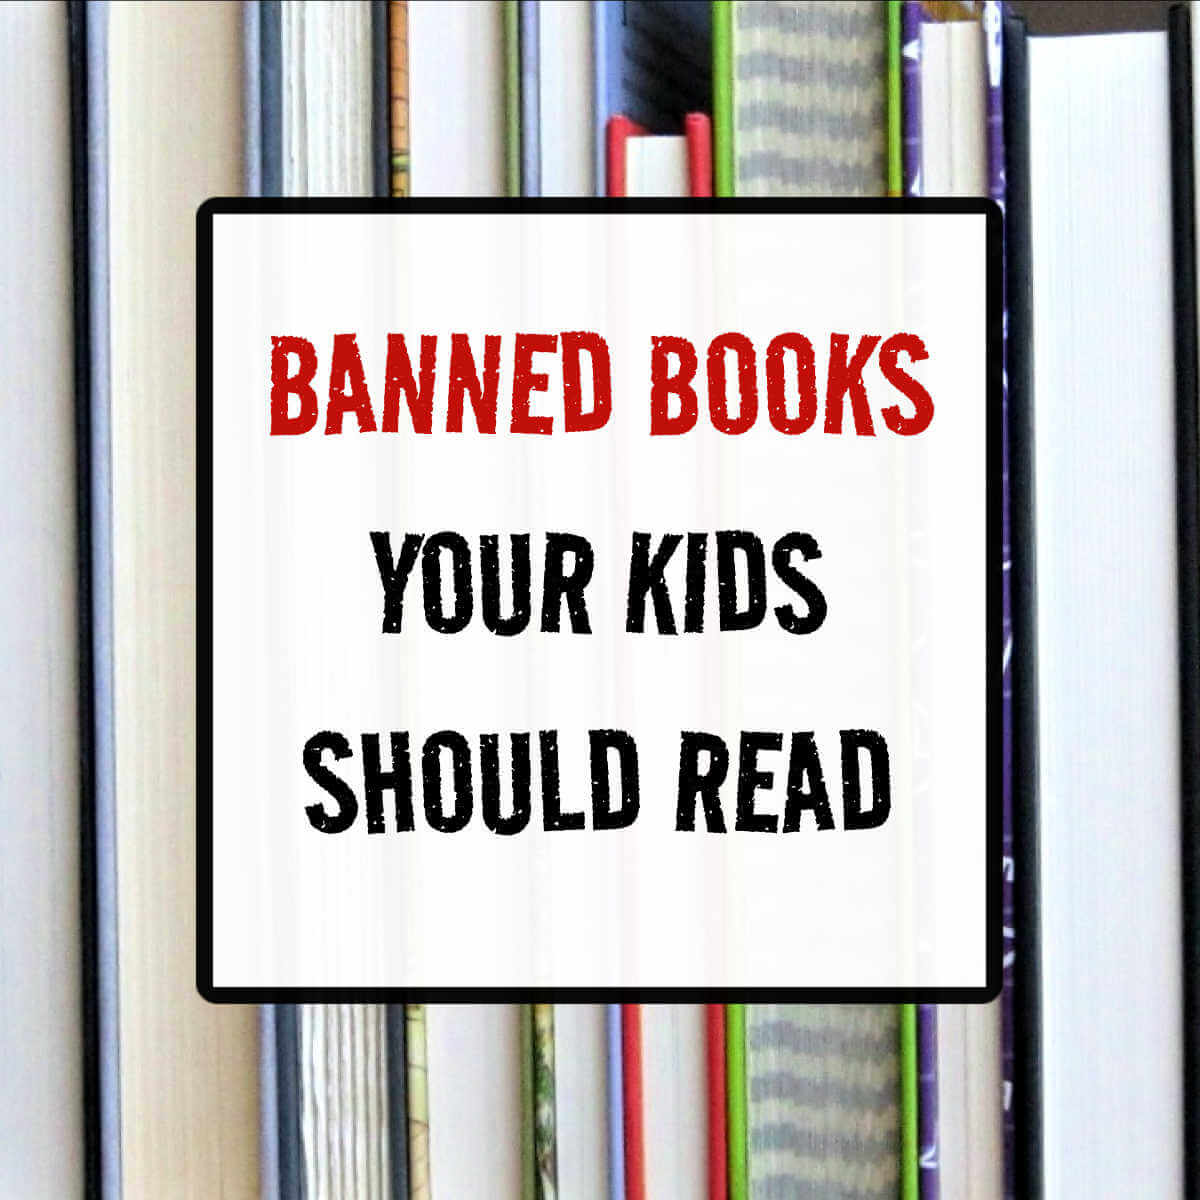 Banned Books Your Kids Should Read